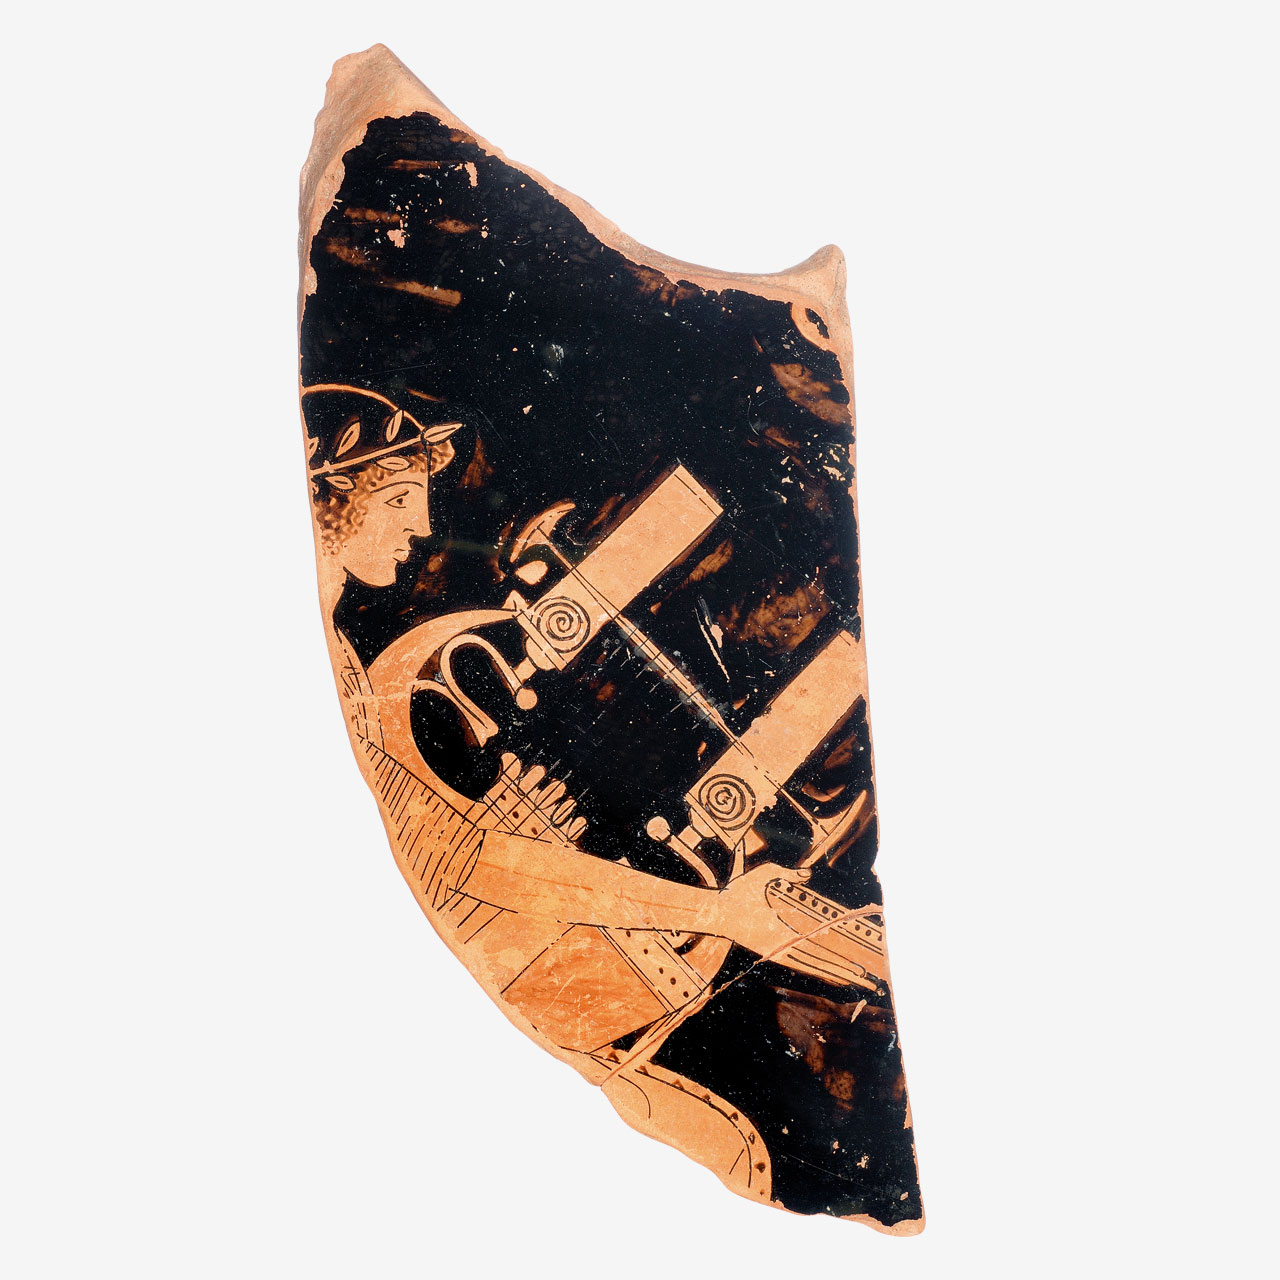 Fragment of a clay red-figured krater with representation of Apollo kitharodos (singing and playing the kithara).